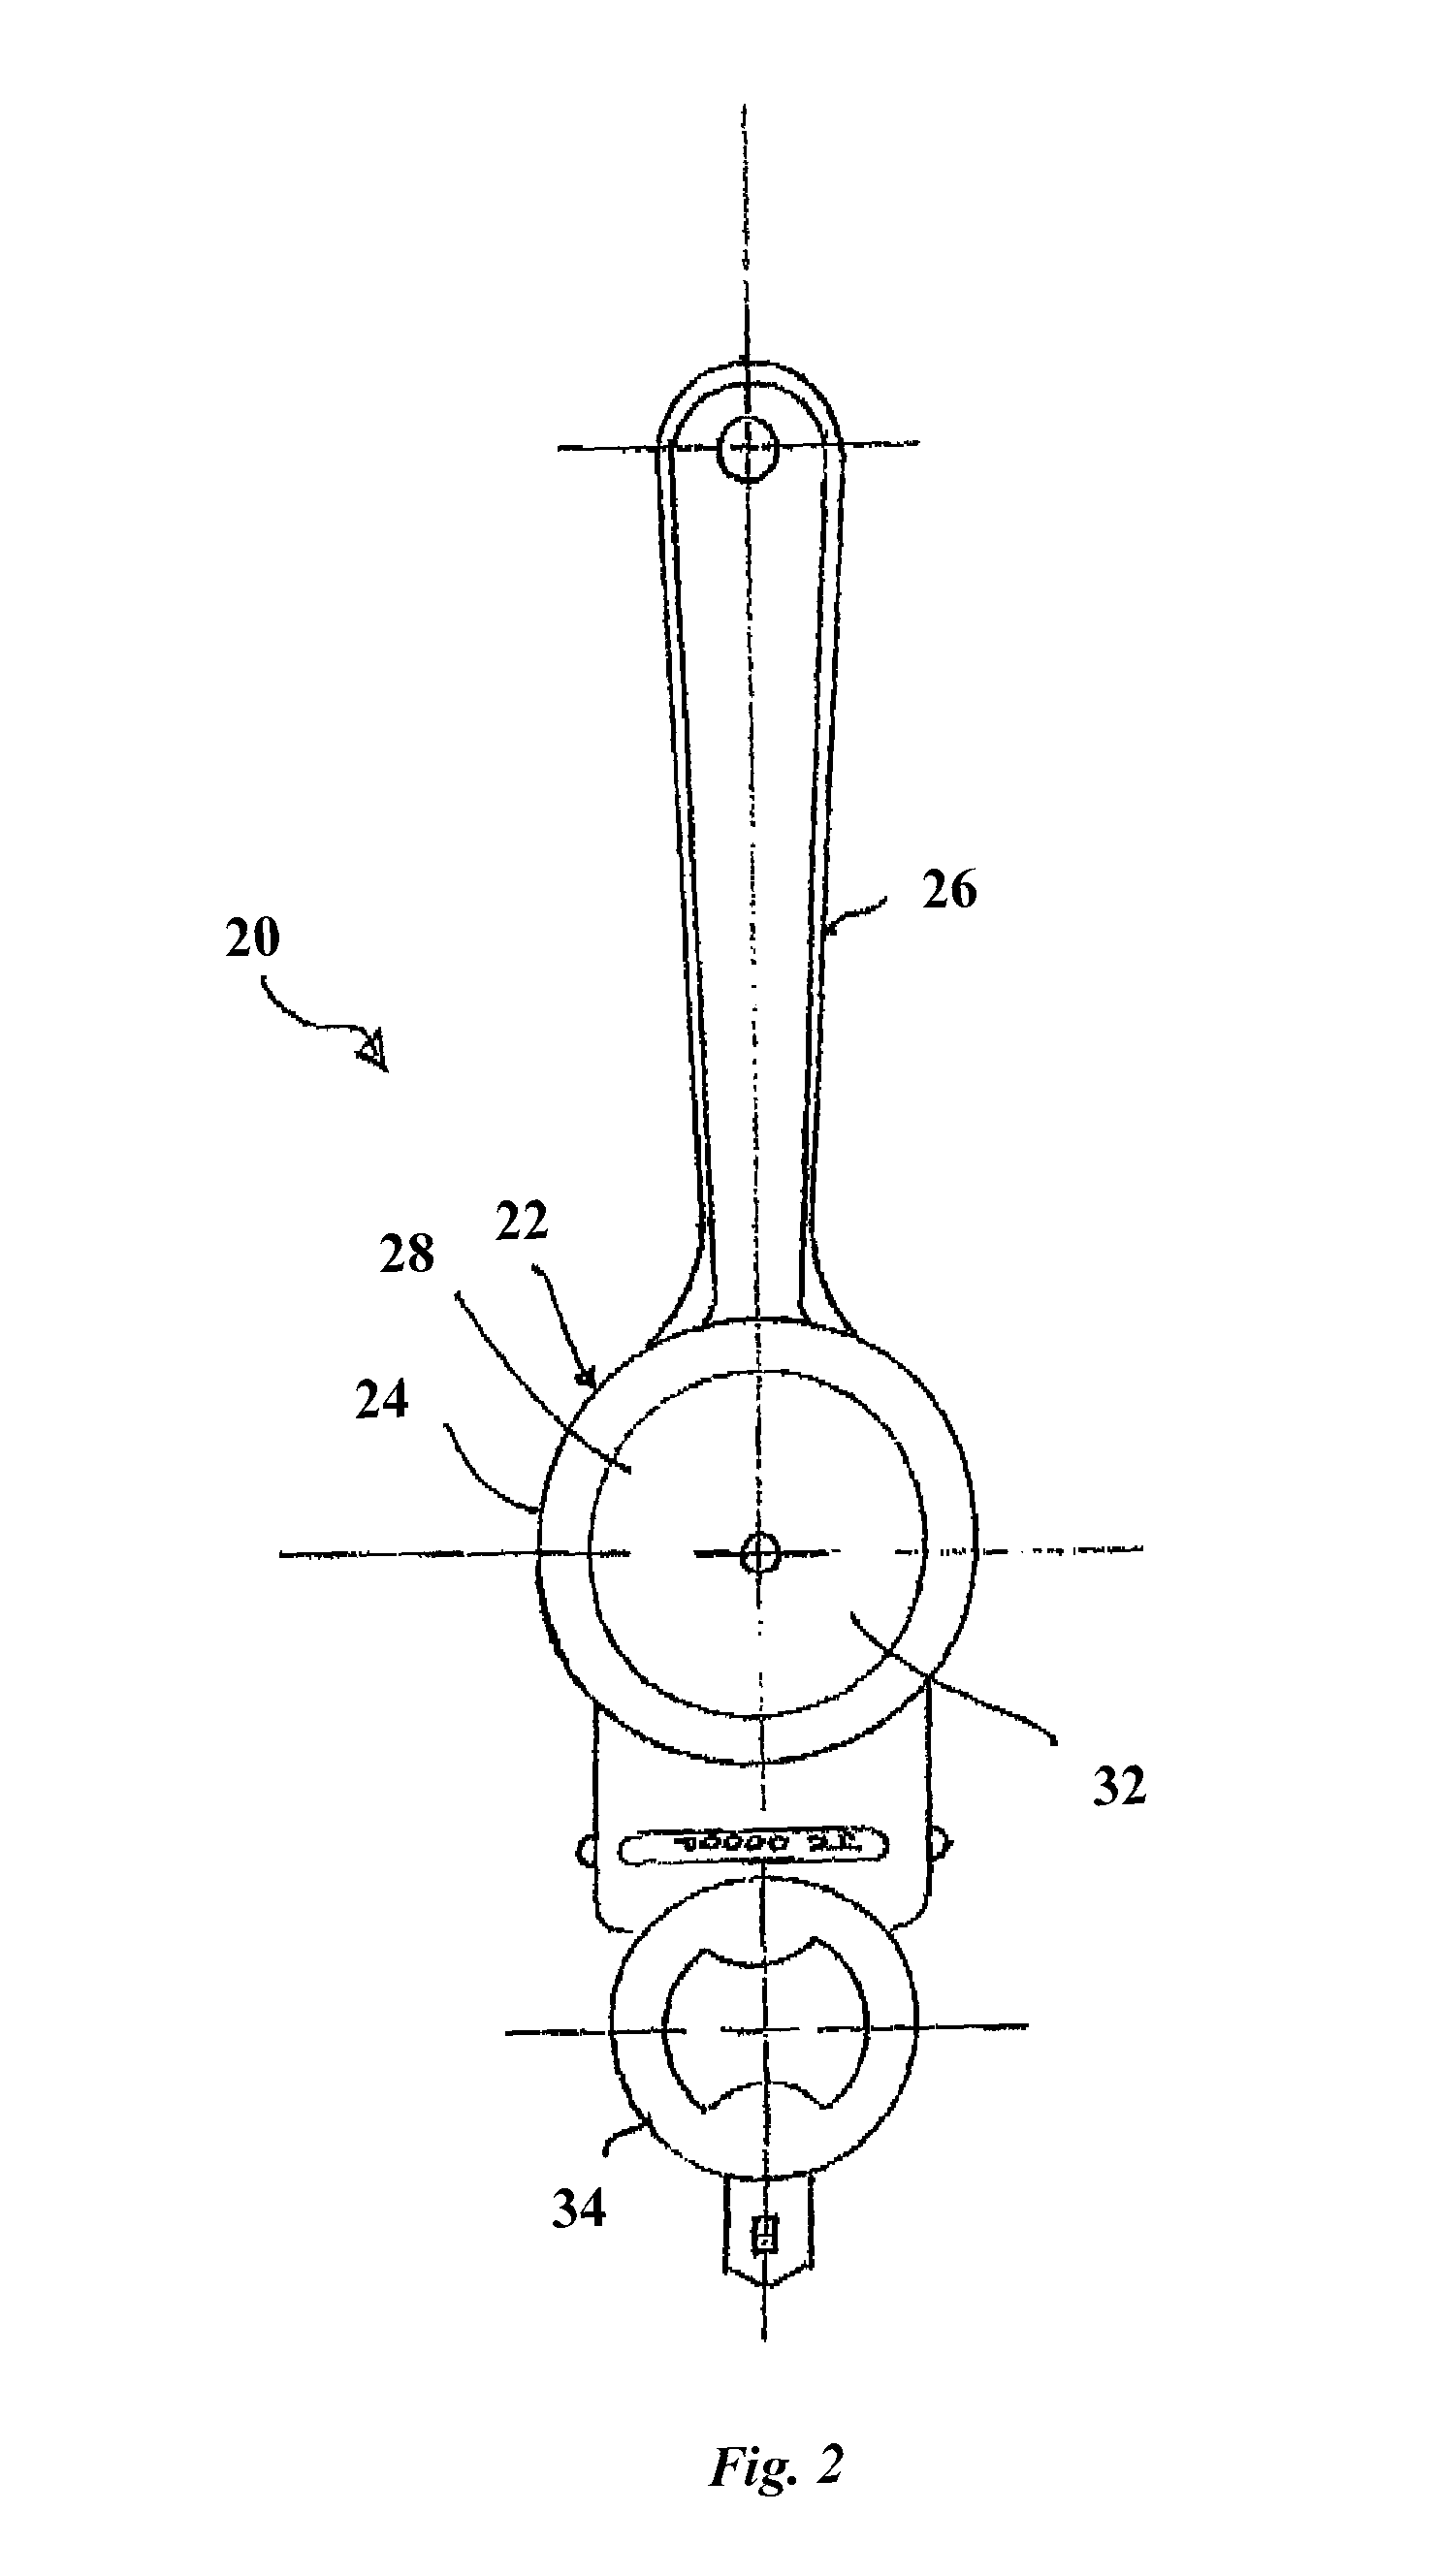 Multi-functional bartender's tool and related methods